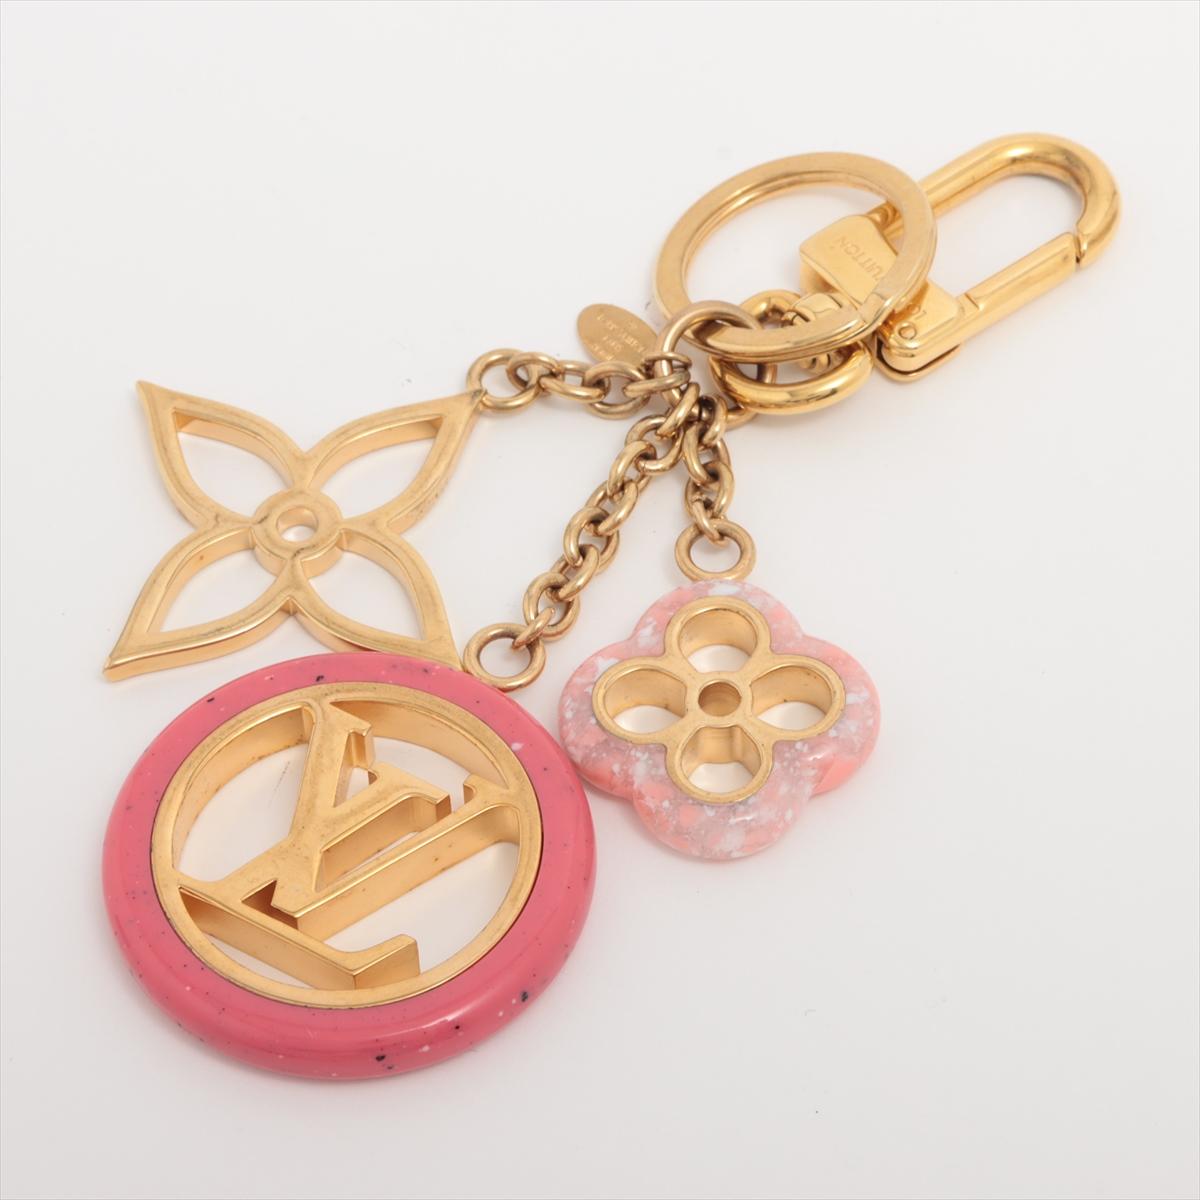 The Louis Vuitton Colorline Bag Charm is a vibrant and stylish accessory that adds a playful touch to any Louis Vuitton bag. Crafted with meticulous attention to detail, the bag charm reinterprets the Maison's Monogram Flowers and the LV Initials